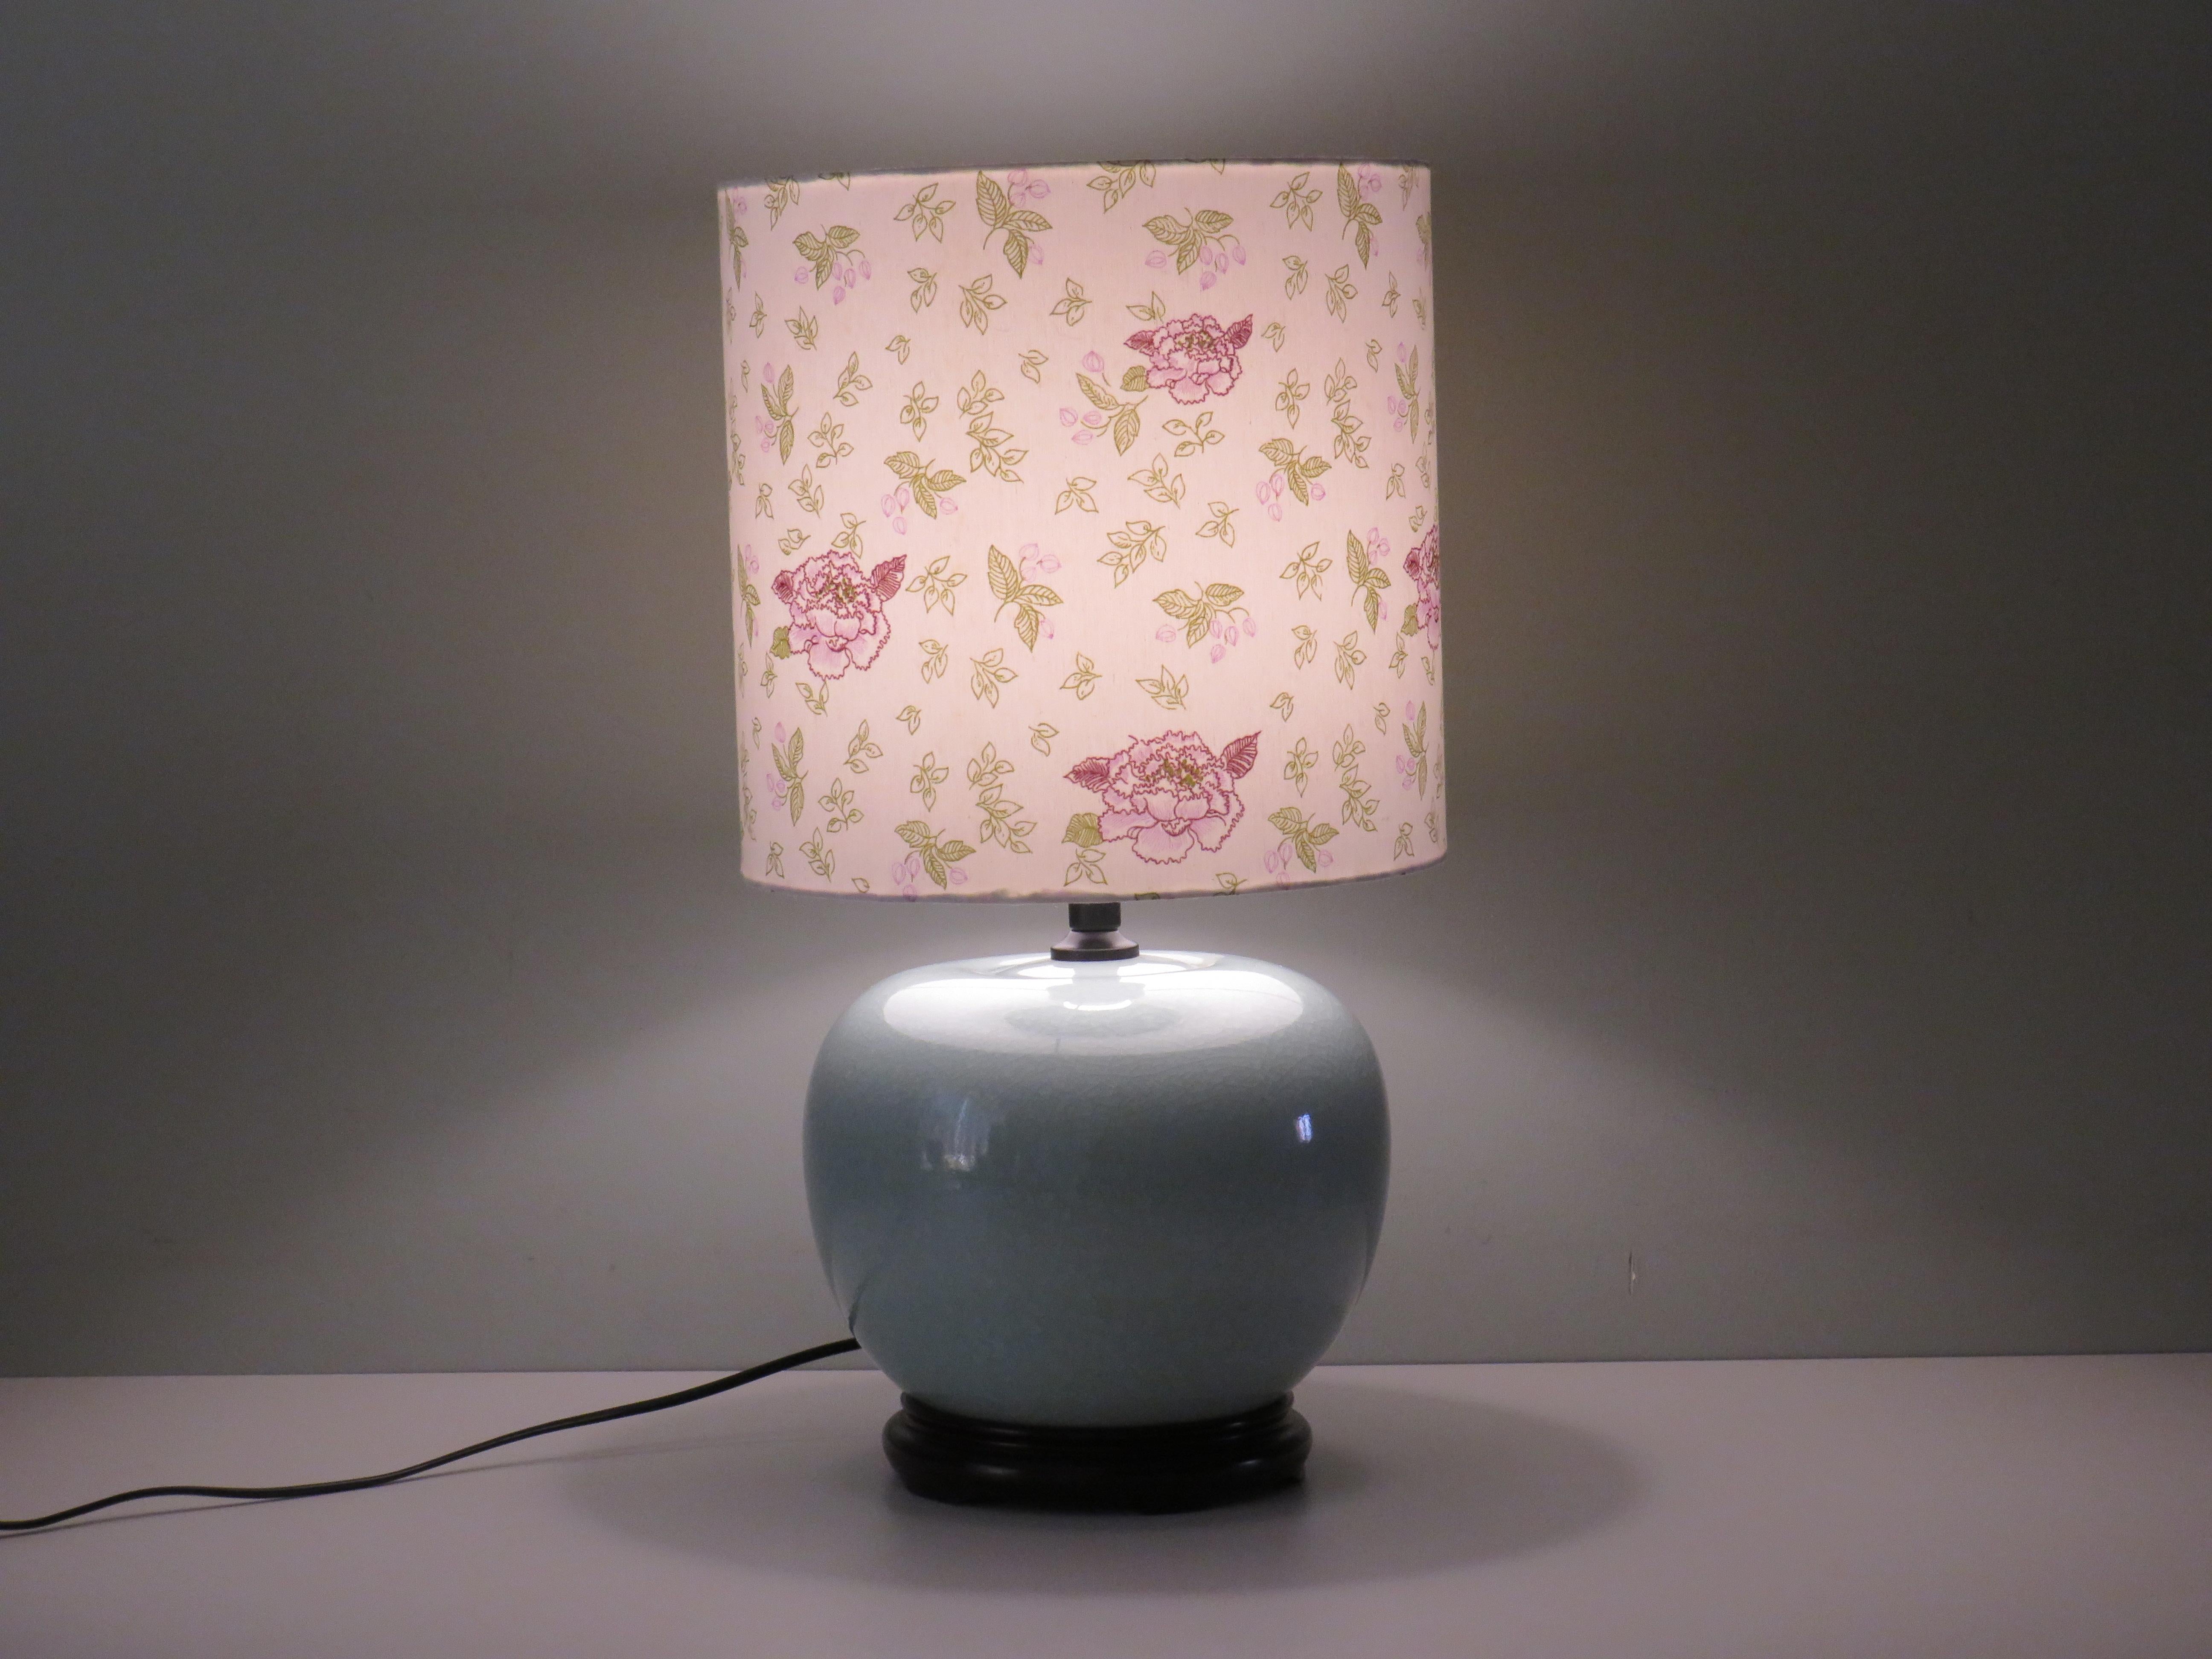 Lamp base made of glazed celadon-colored ceramic with crackle on a black wooden base.
The lampshade is custom made from a cotton fabric with burgundy, pink and green flower and leaf motifs on a white background.
The lampshade is 29 cm high and has